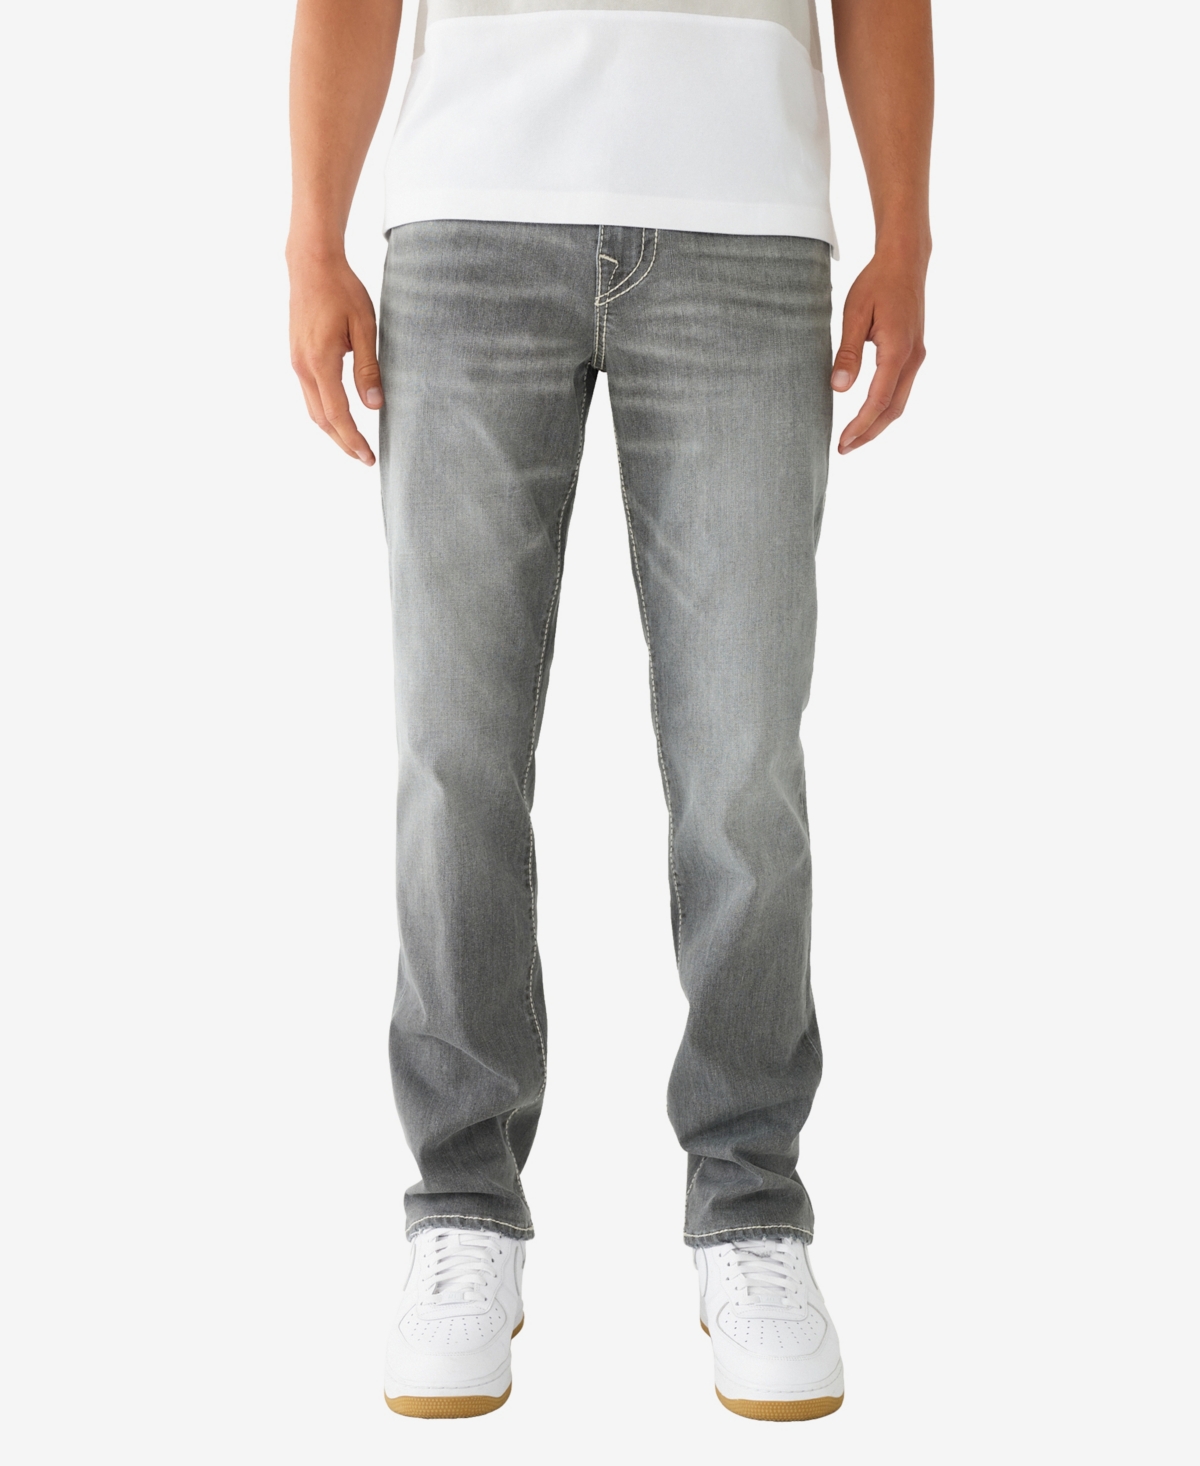 True Religion Ricky Straight Fit Jeans In Chalk Gre In Chalk Gray Wash